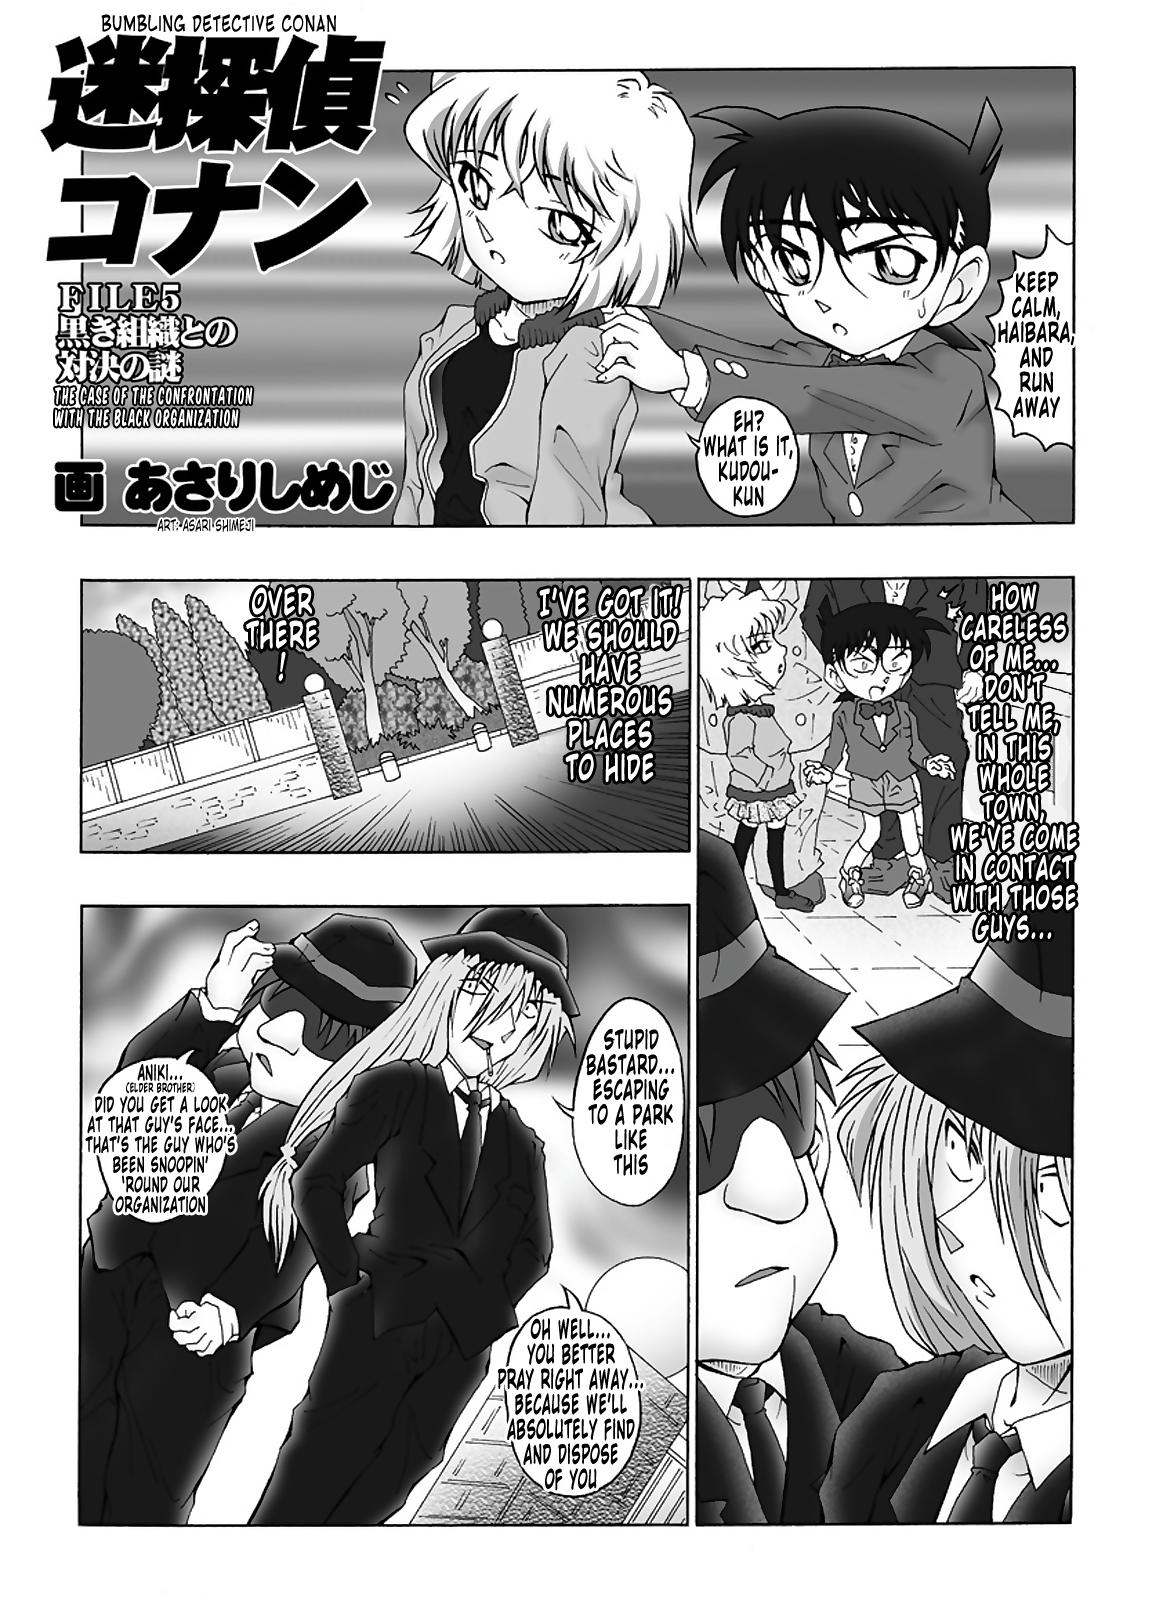 Suck Bumbling Detective Conan - File 5: The Case of The Confrontation with The Black Organiztion - Detective conan Foot - Page 4